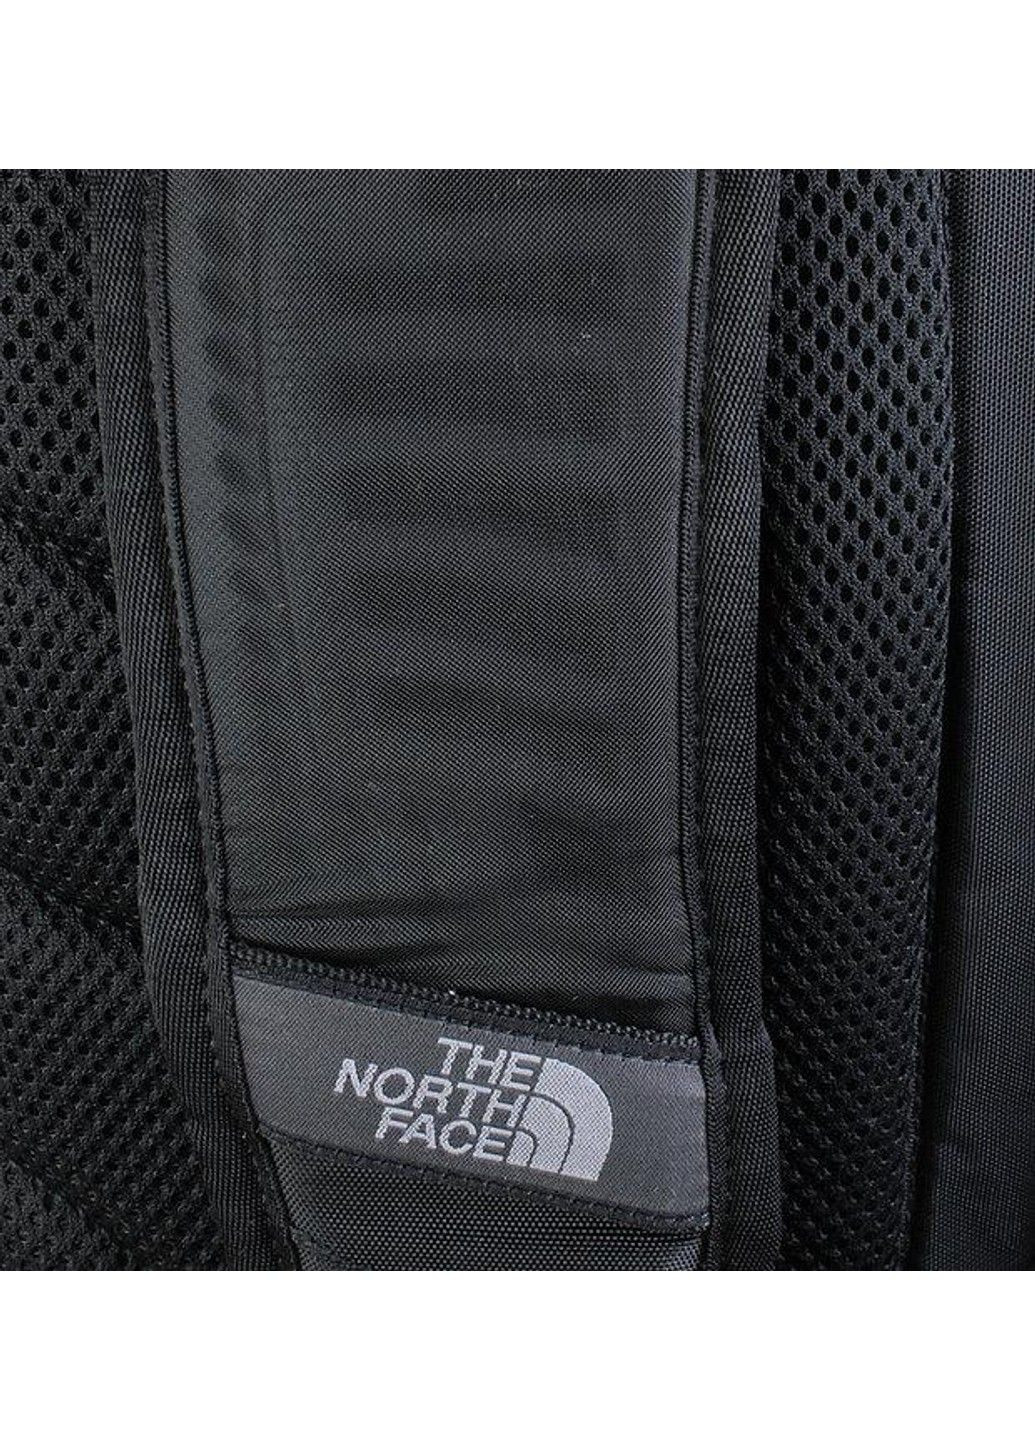 Рюкзак Mainframe-2 The North Face (282719222)